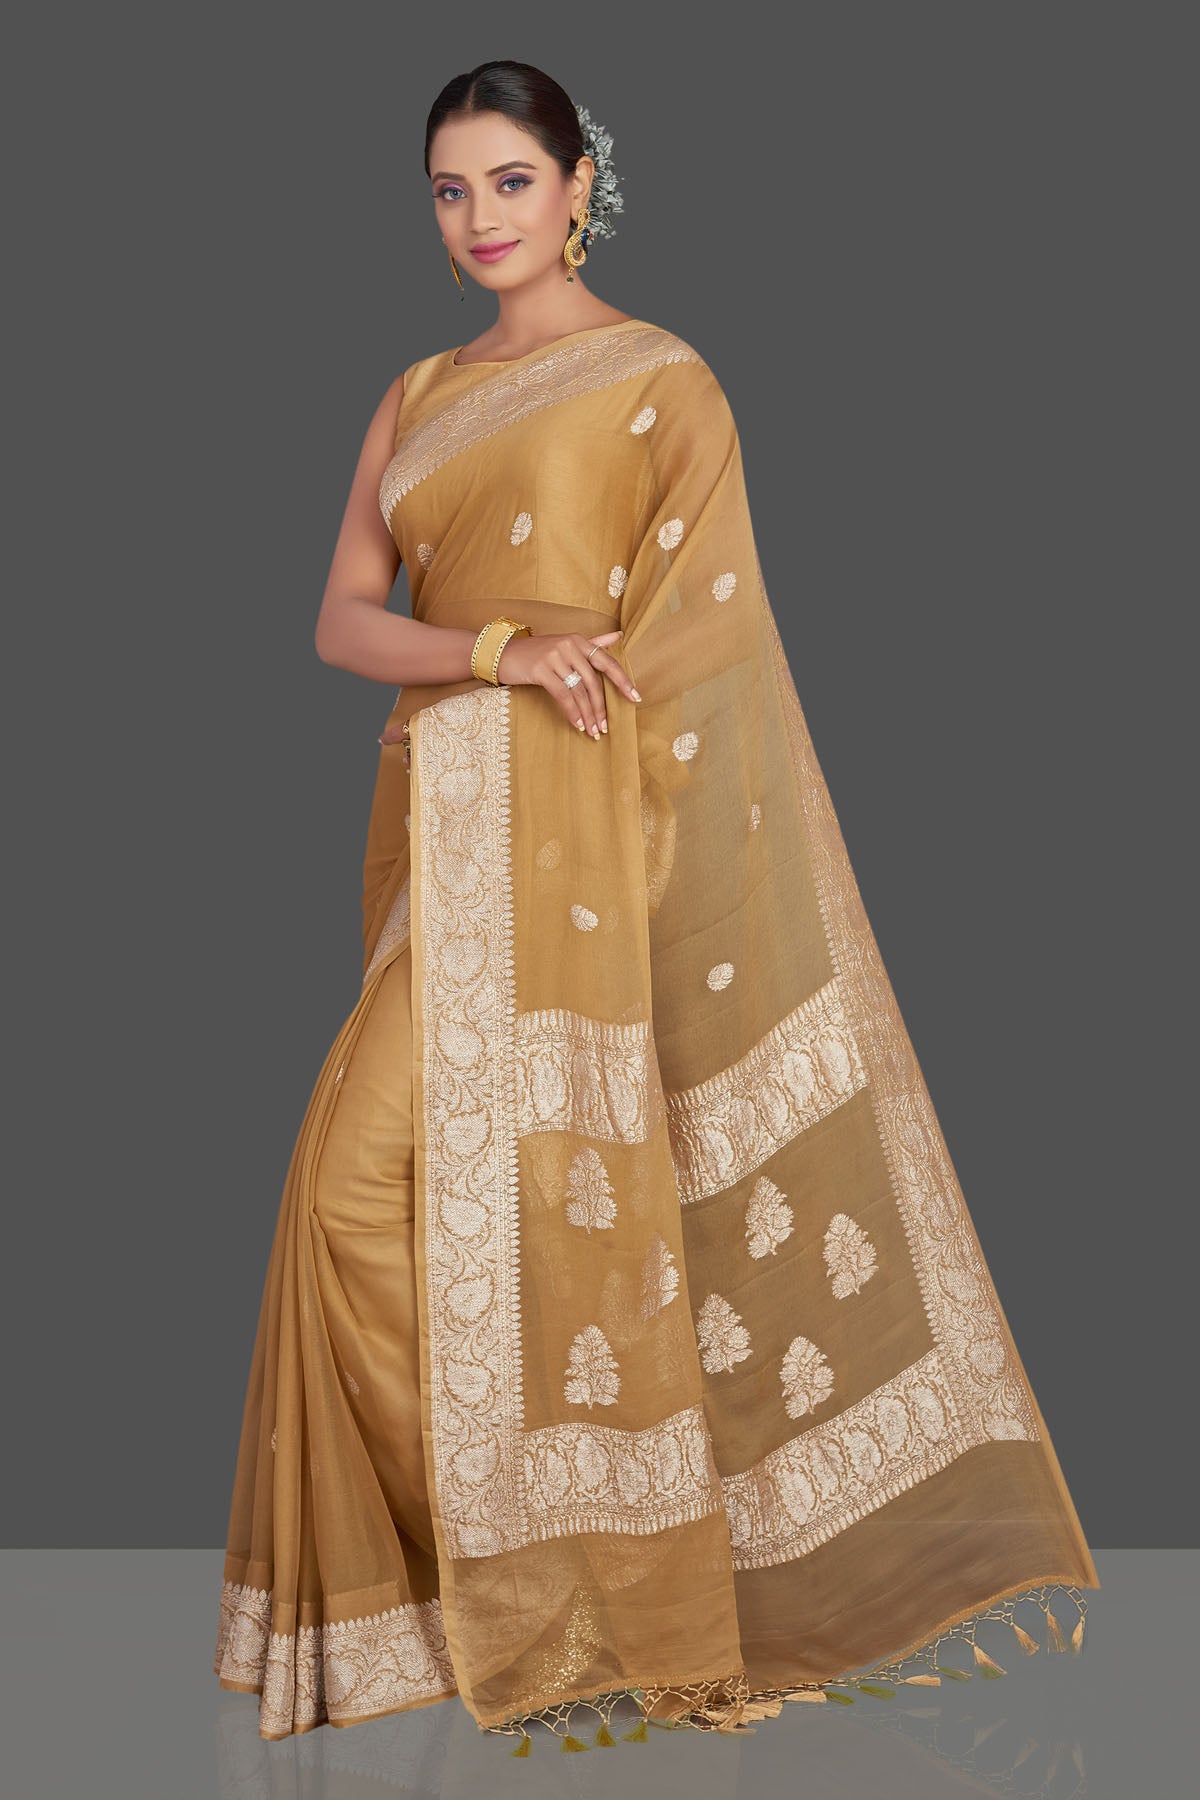 Buy beautiful beige chiffon georgette Banarasi saree online in USA with silver zari border. Look your best on special occasions with stunning Banarasi sarees, pure silk saris, tussar saris, handwoven sarees from Pure Elegance Indian saree store in USA.-pallu